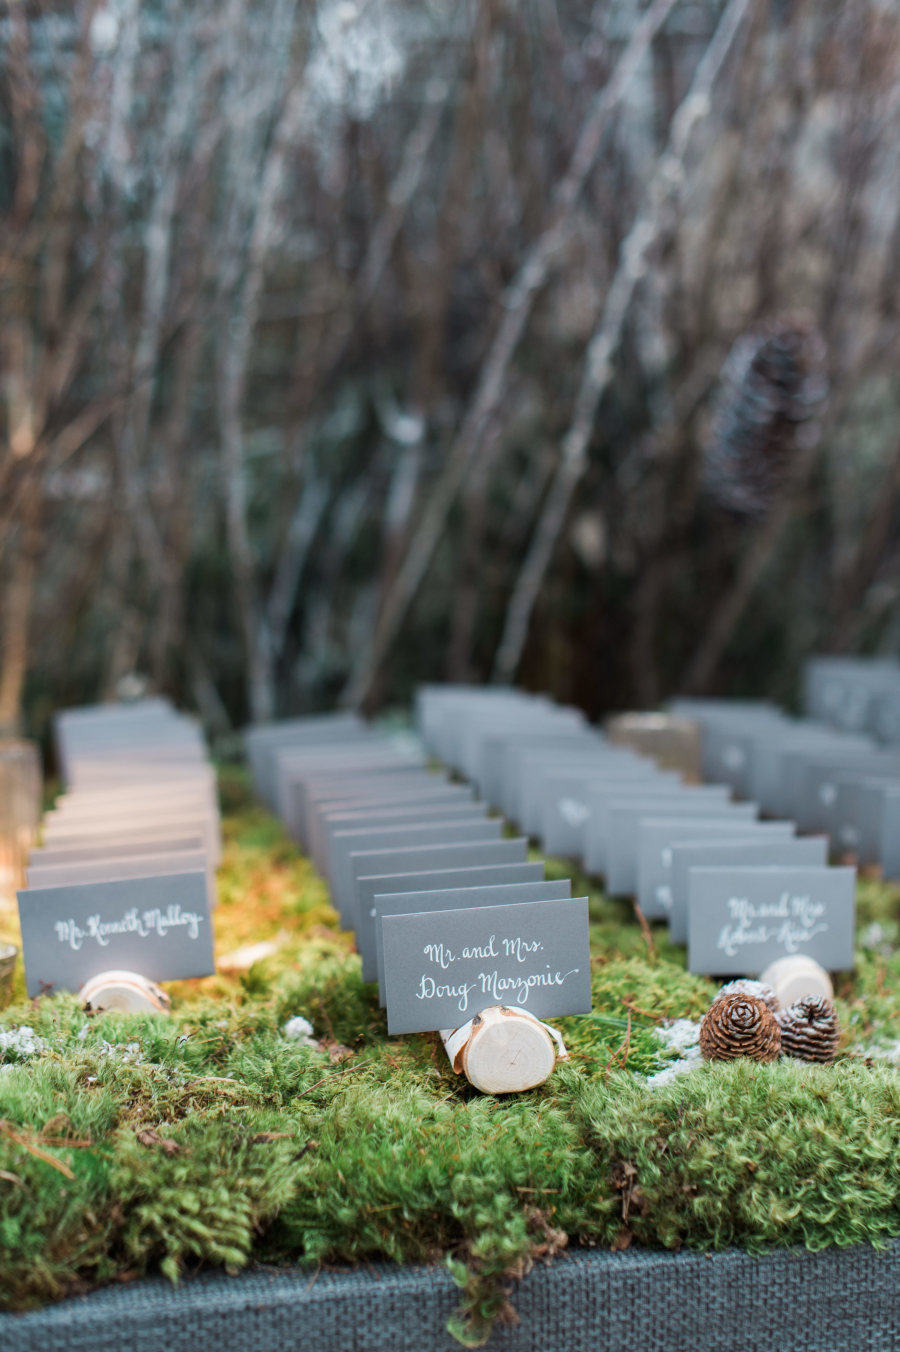 The cards were placed on birch slices, moss and pinecones